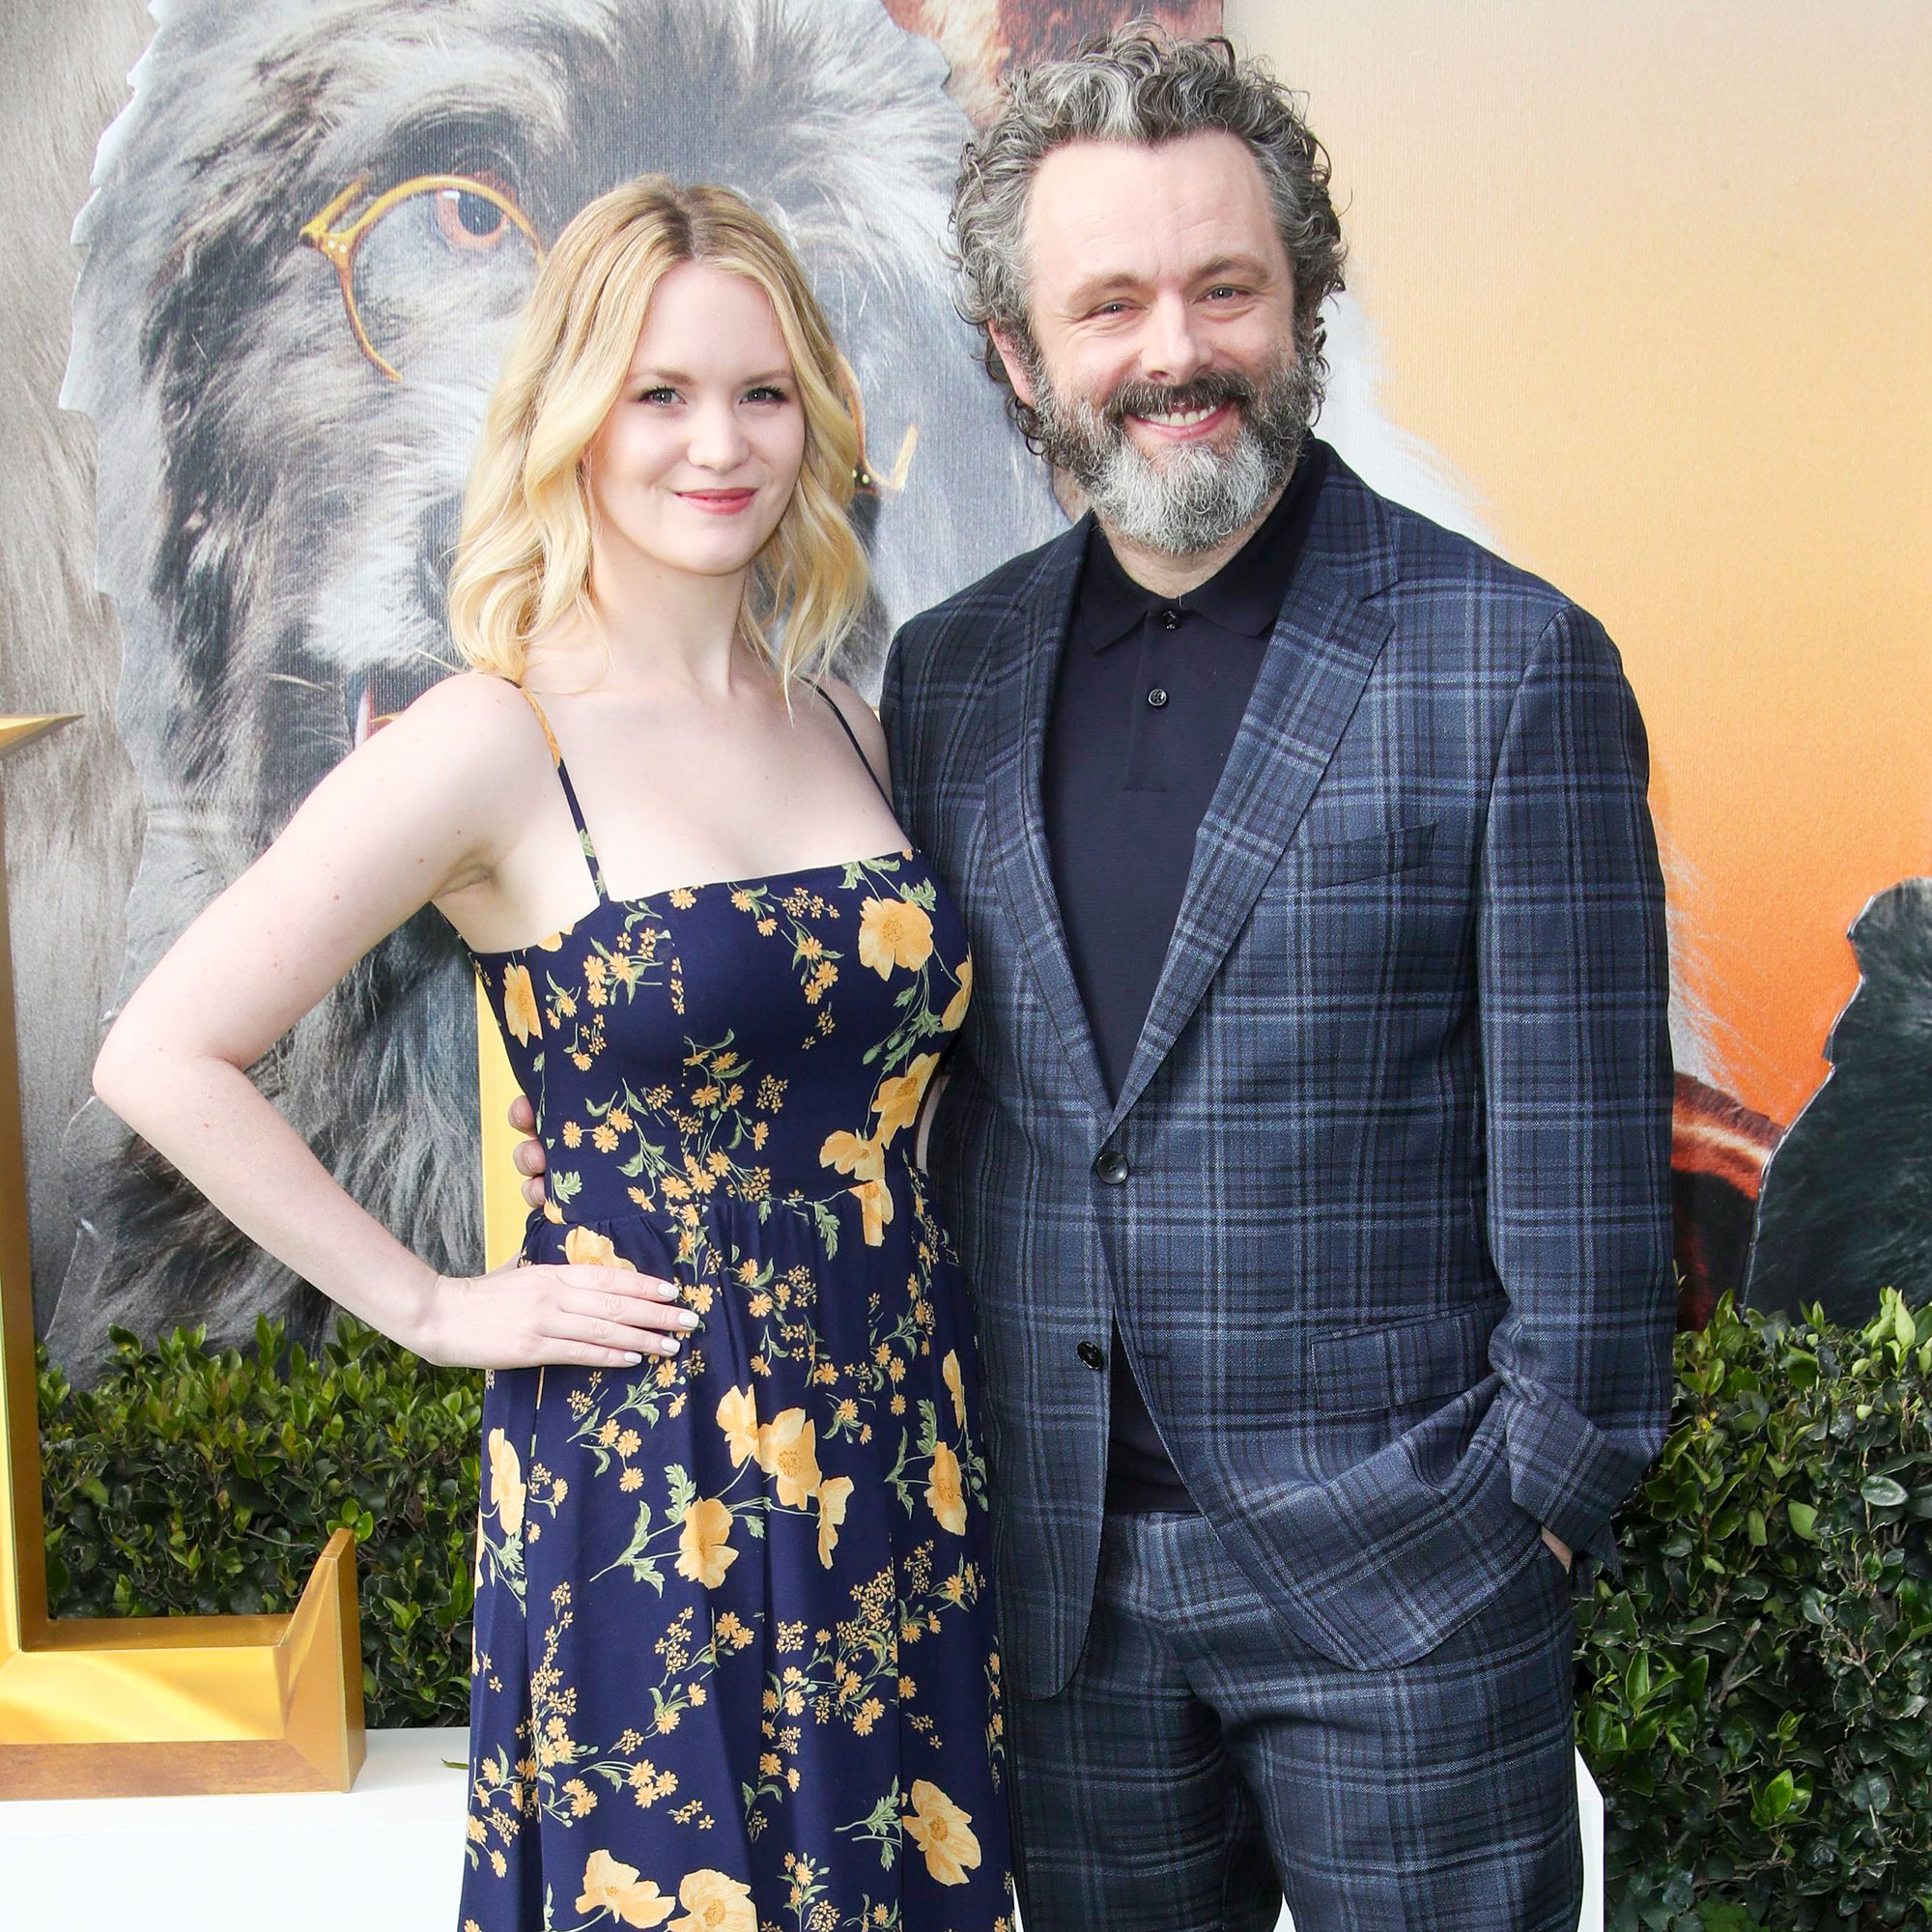 Ann Angel Sex - Michael Sheen Welcomes 3rd Baby, His 2nd With Anna Lundberg